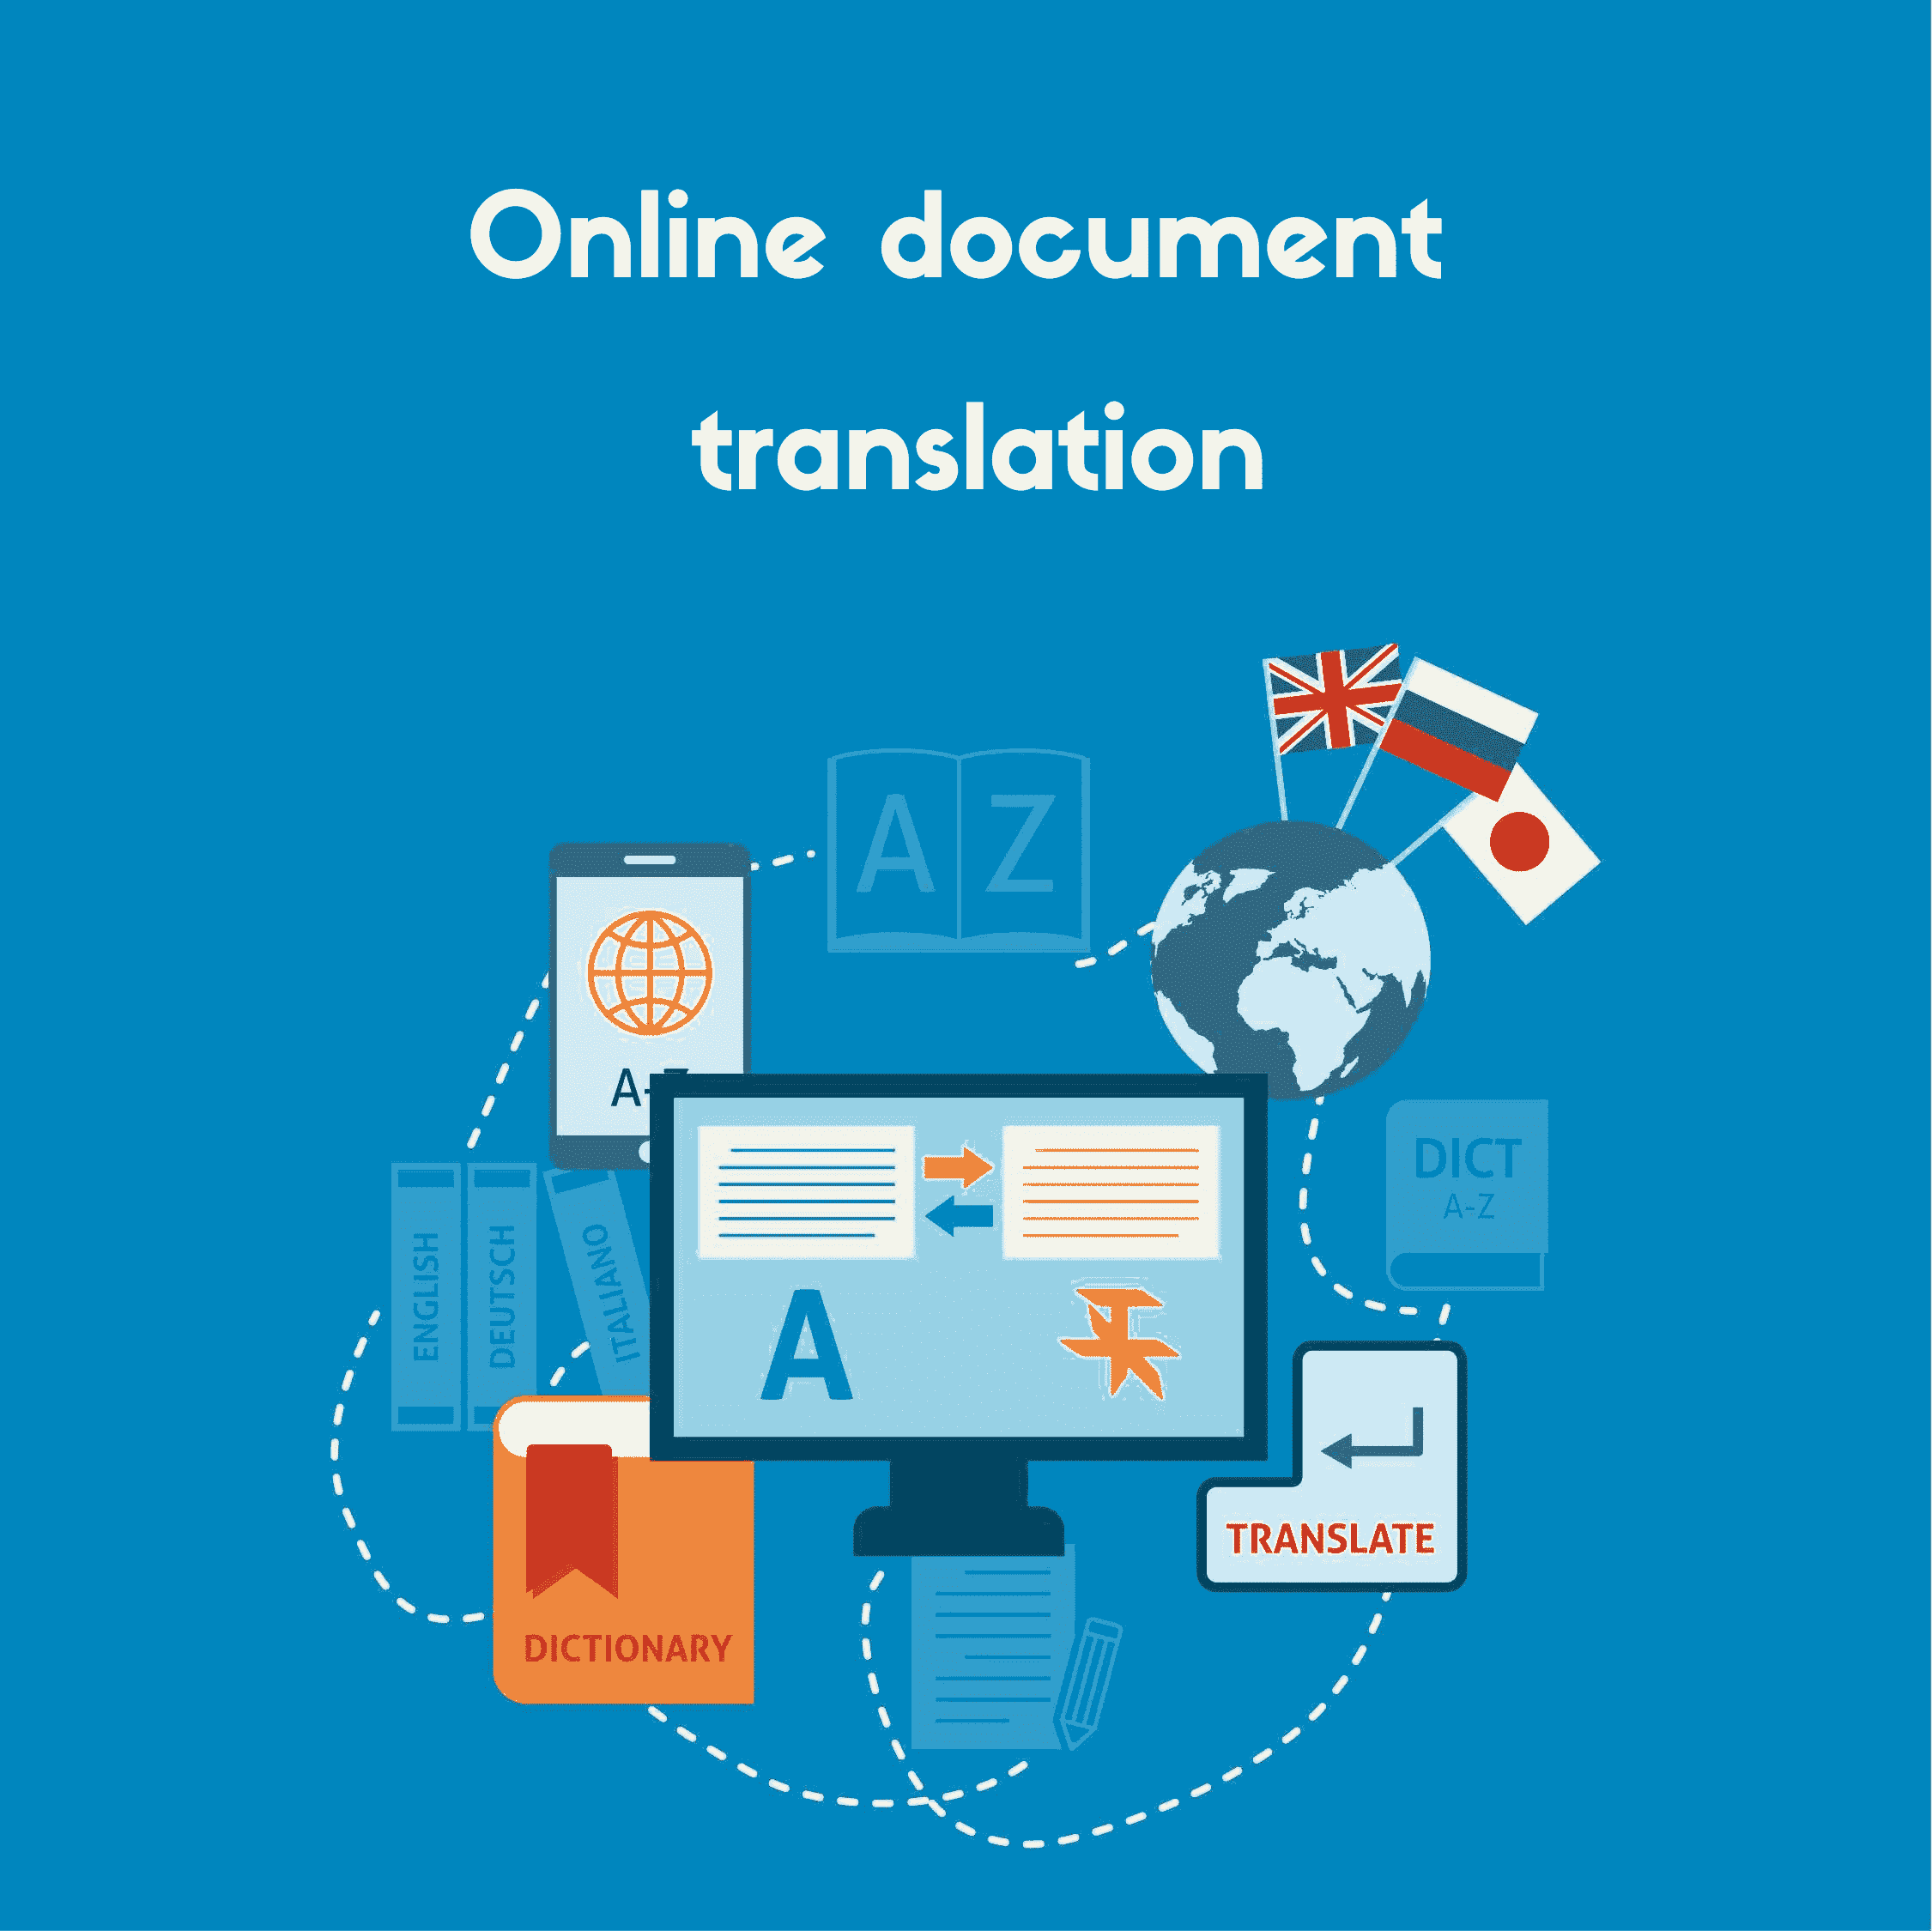 This image gives you an idea of how the online document translation tool will work to translate your document.